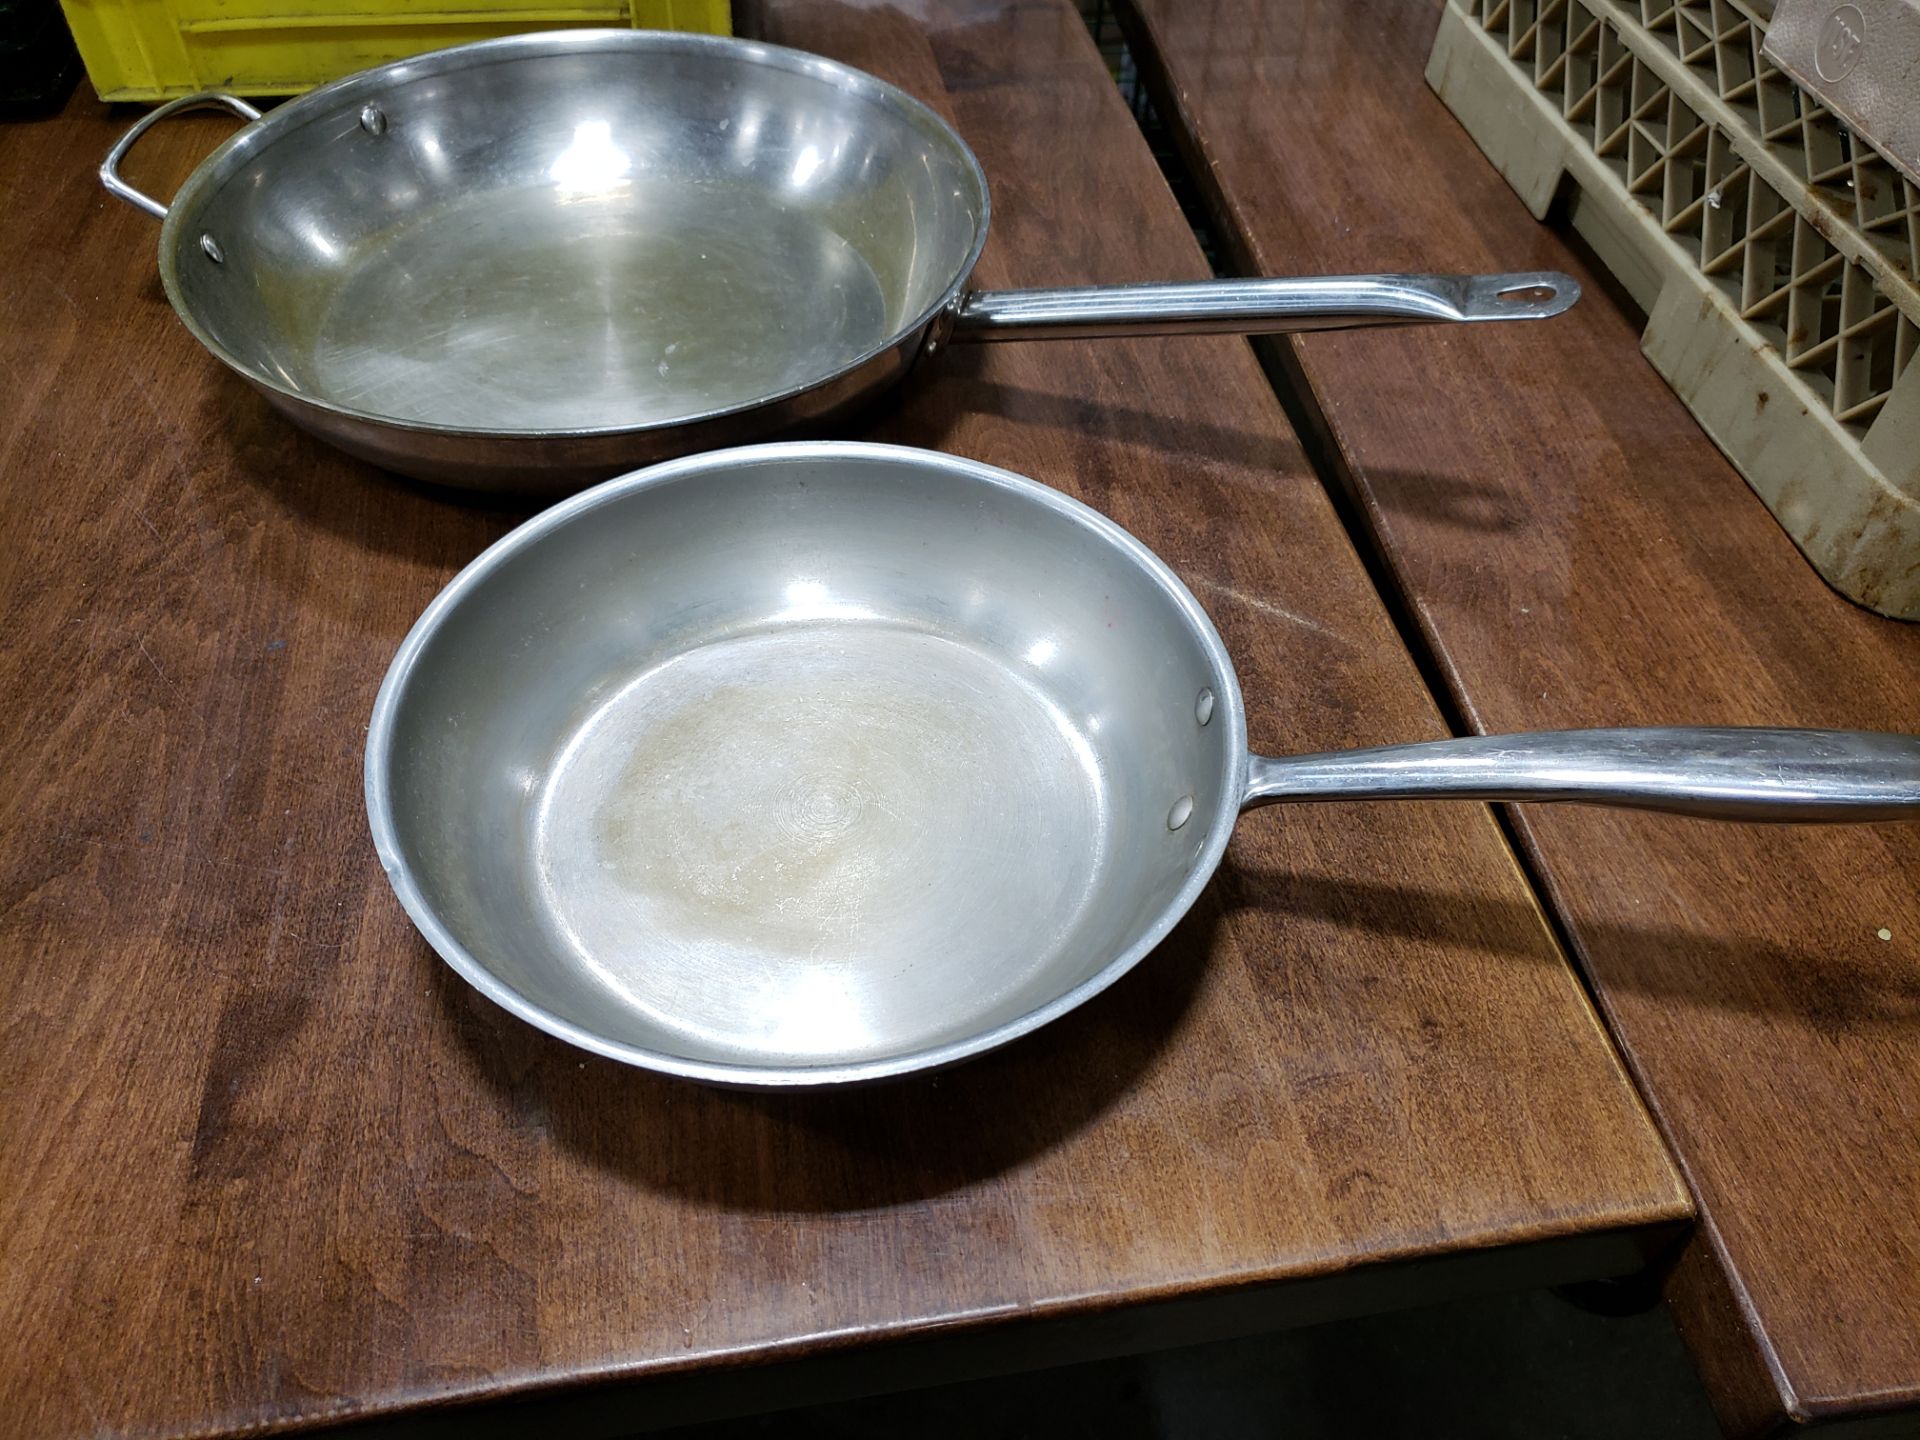 Stainless Steel Fry Pans 1 x 13" & 1 x 10" - Lot of 2 - Image 5 of 5